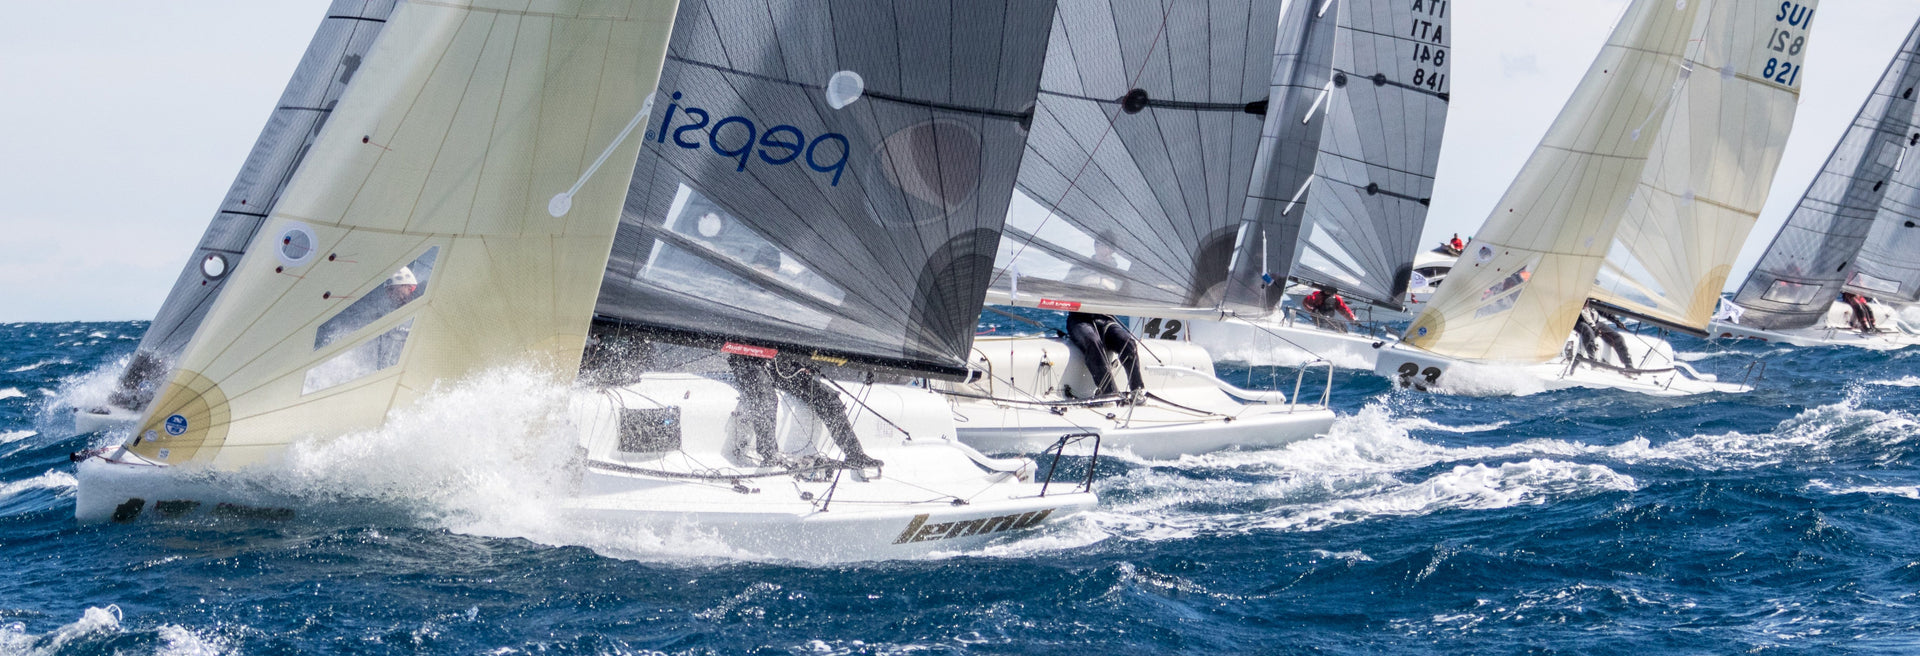 IRELAND’S TEAM EMBARR WINS 2016 MELGES 24 WORLDS WITH 100% NORTH SAILS